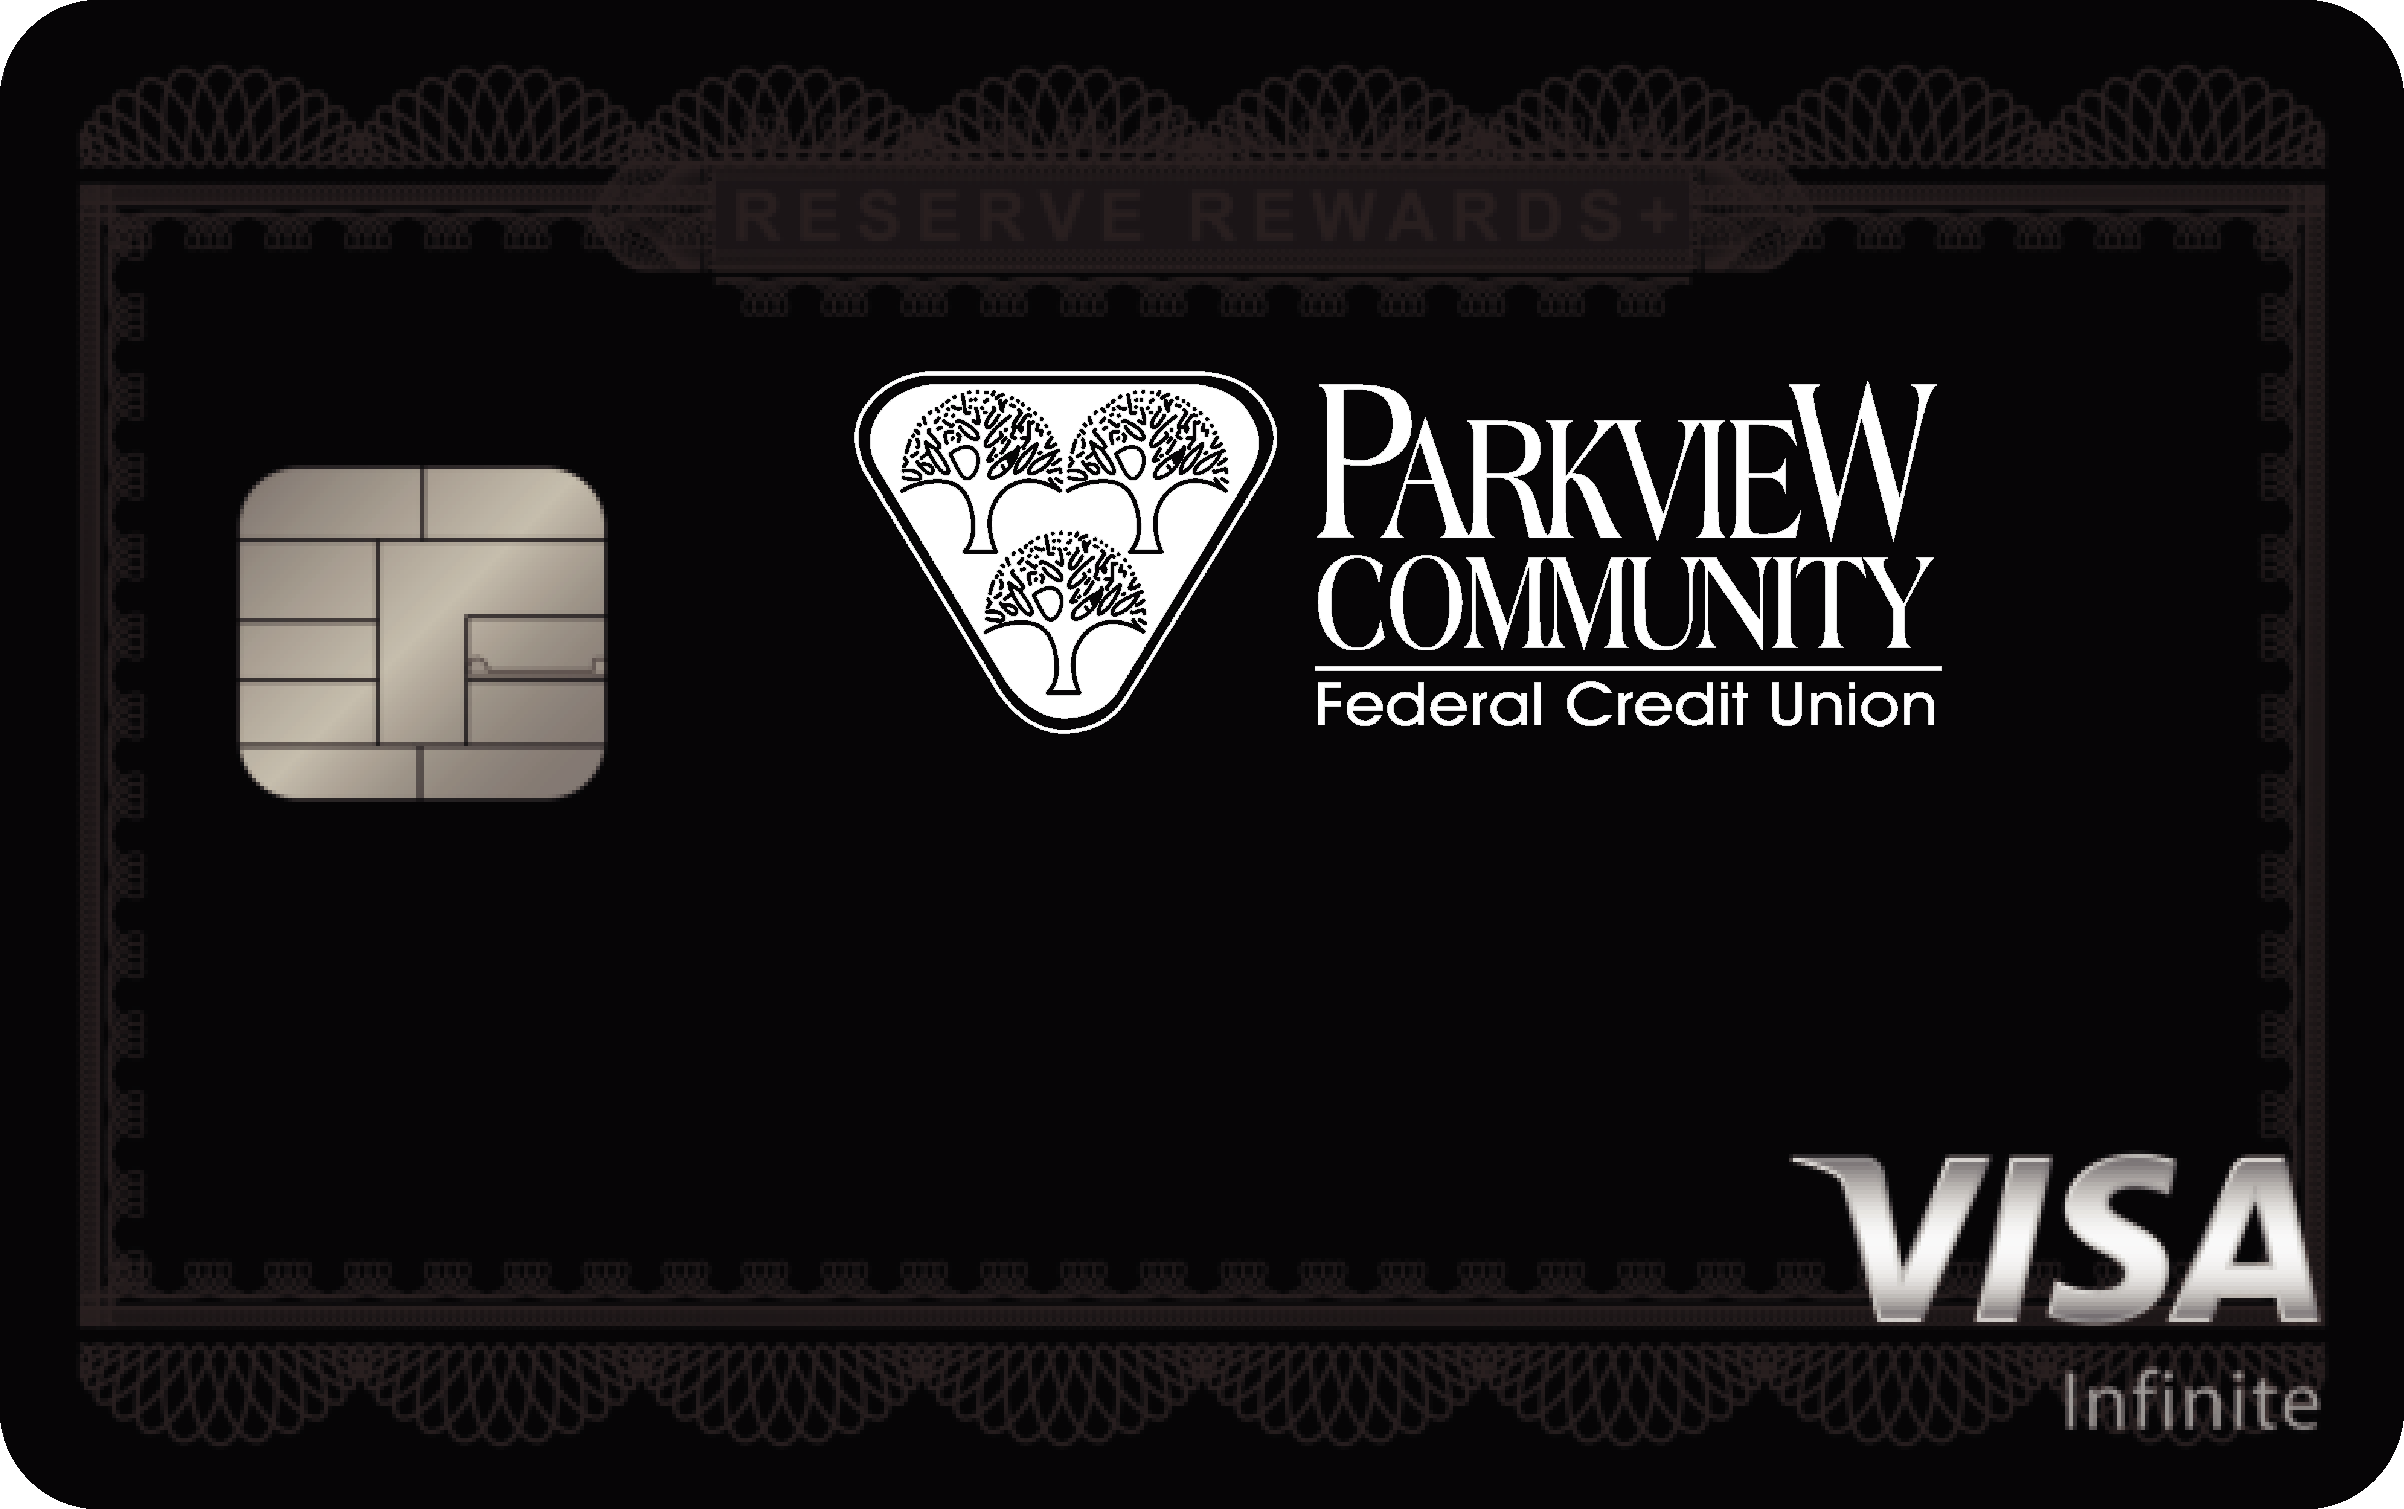 Parkview Community Federal Credit Union